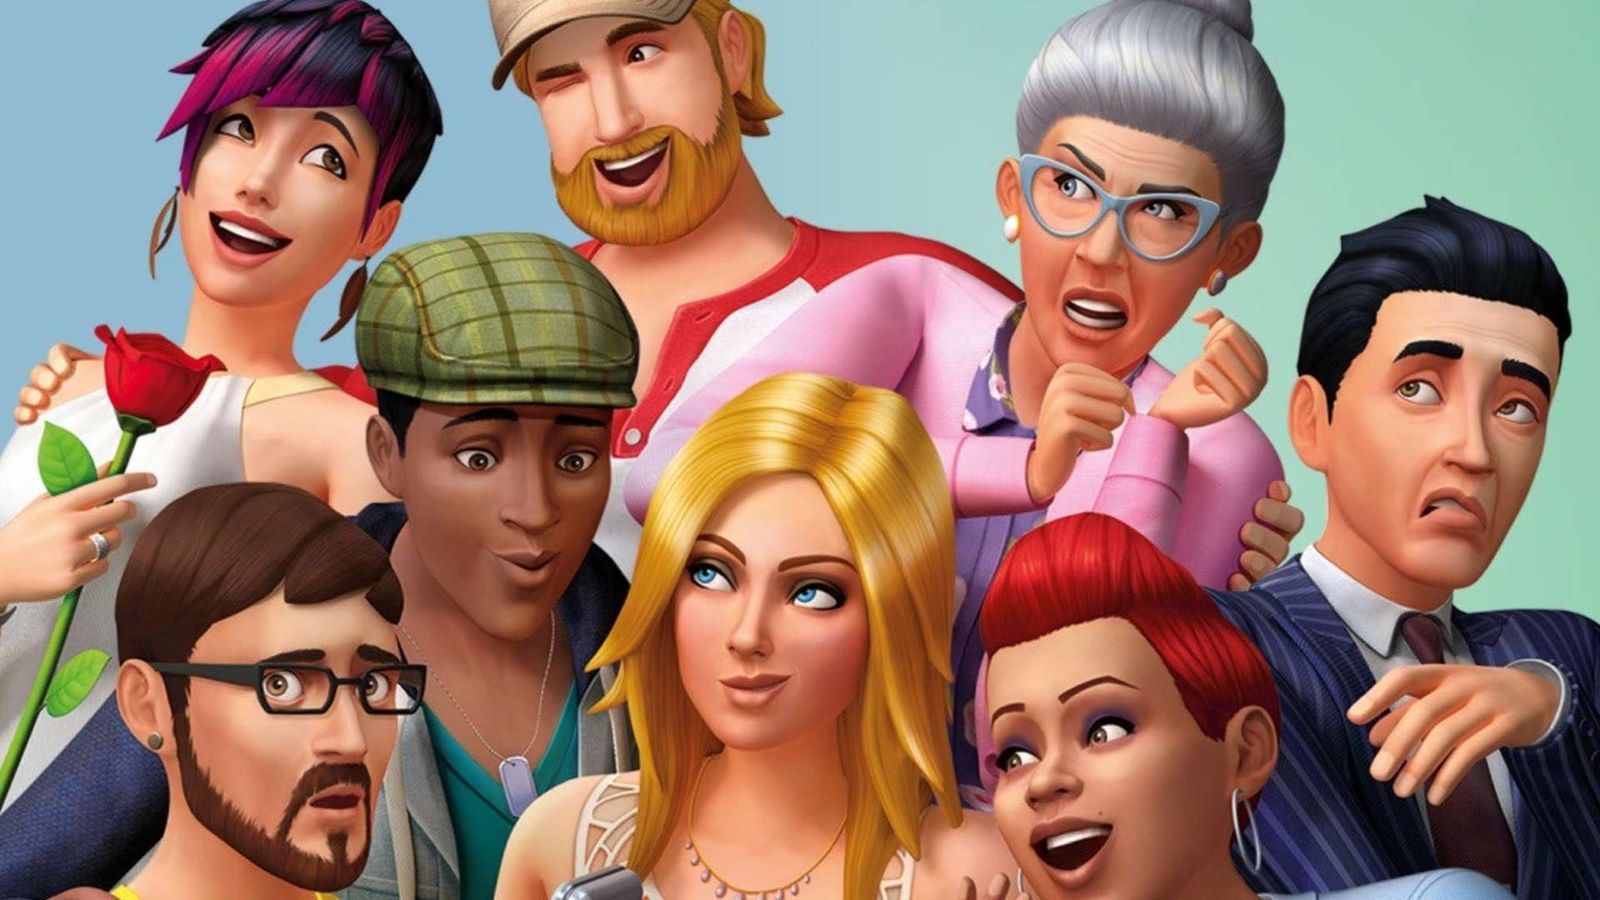 A group of people are posing for a picture in The Sims 4